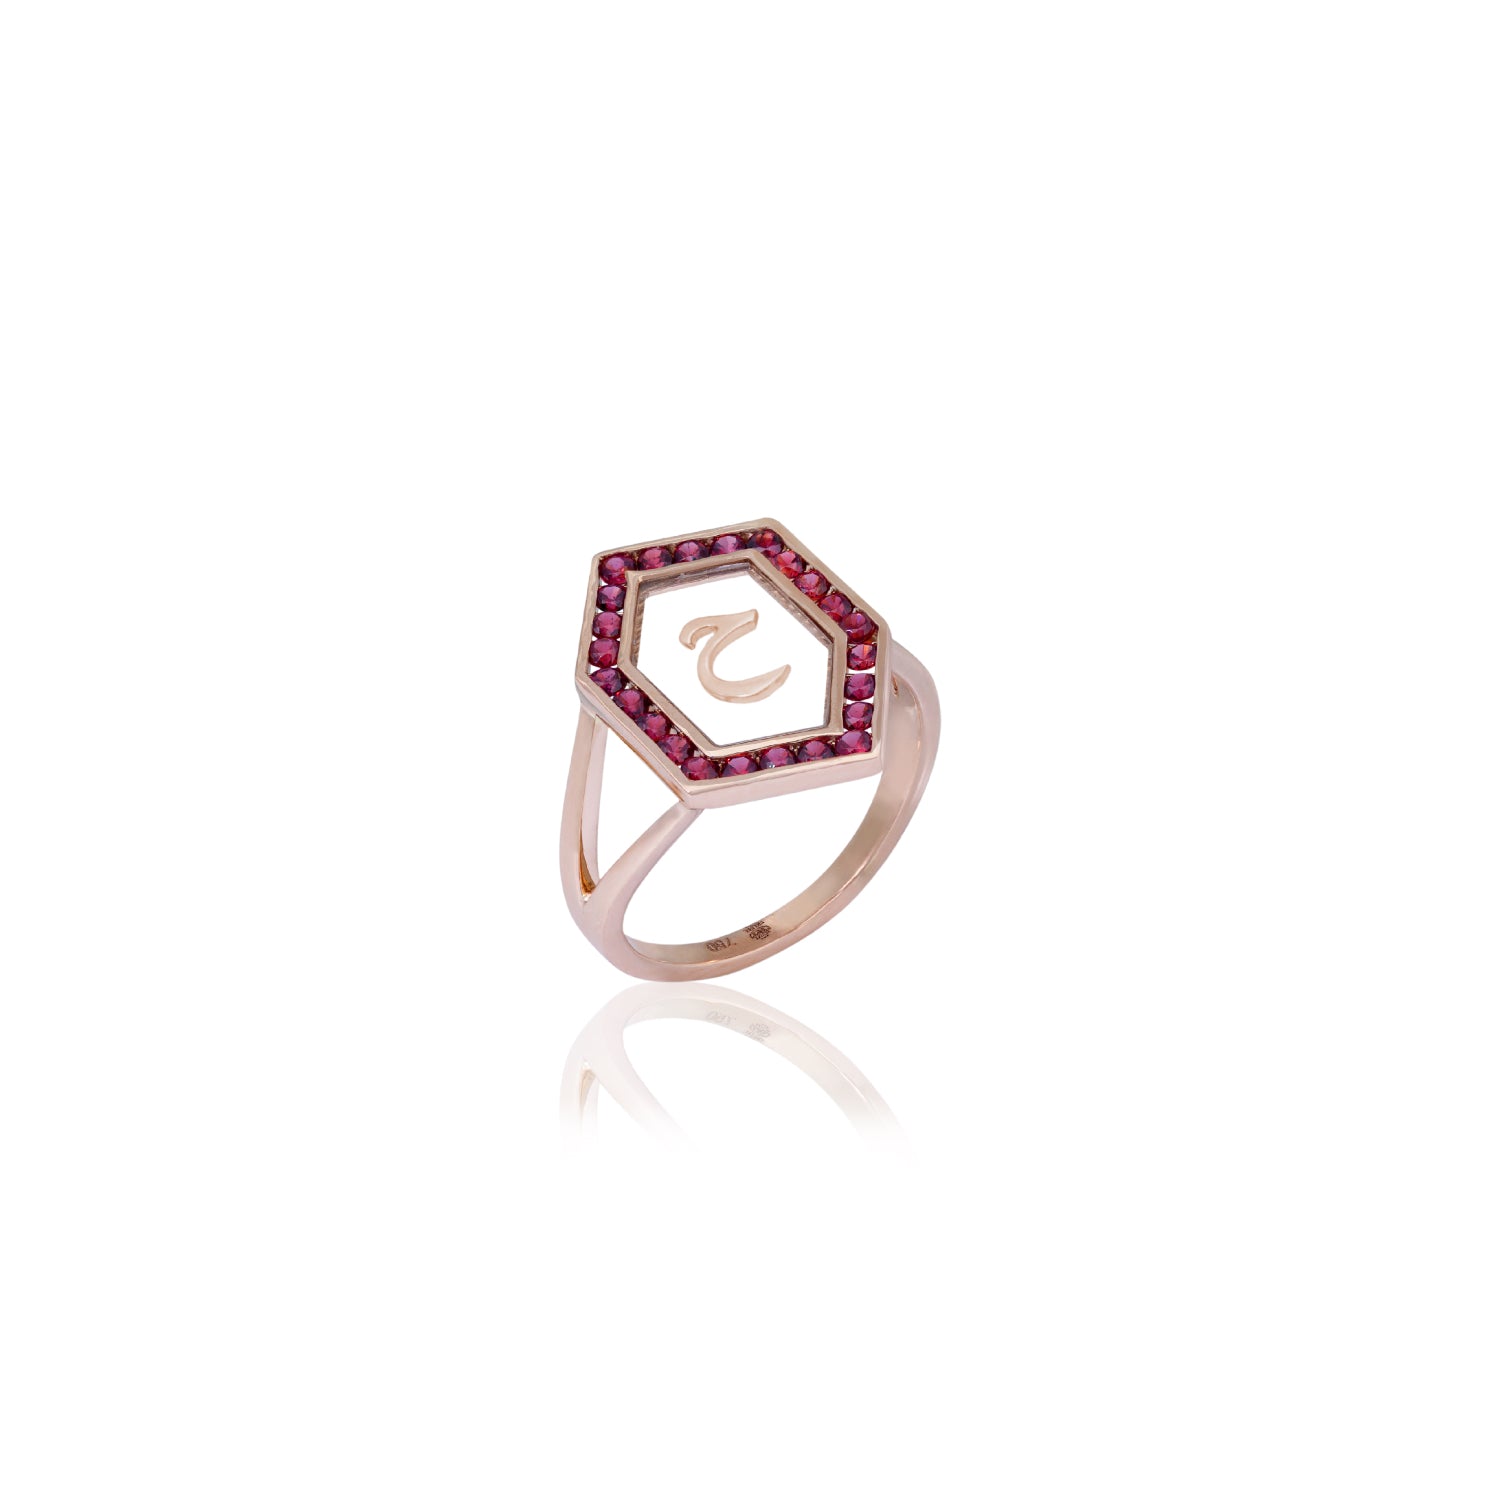 Qamoos 1.0 Letter ح Ruby Ring in Rose Gold